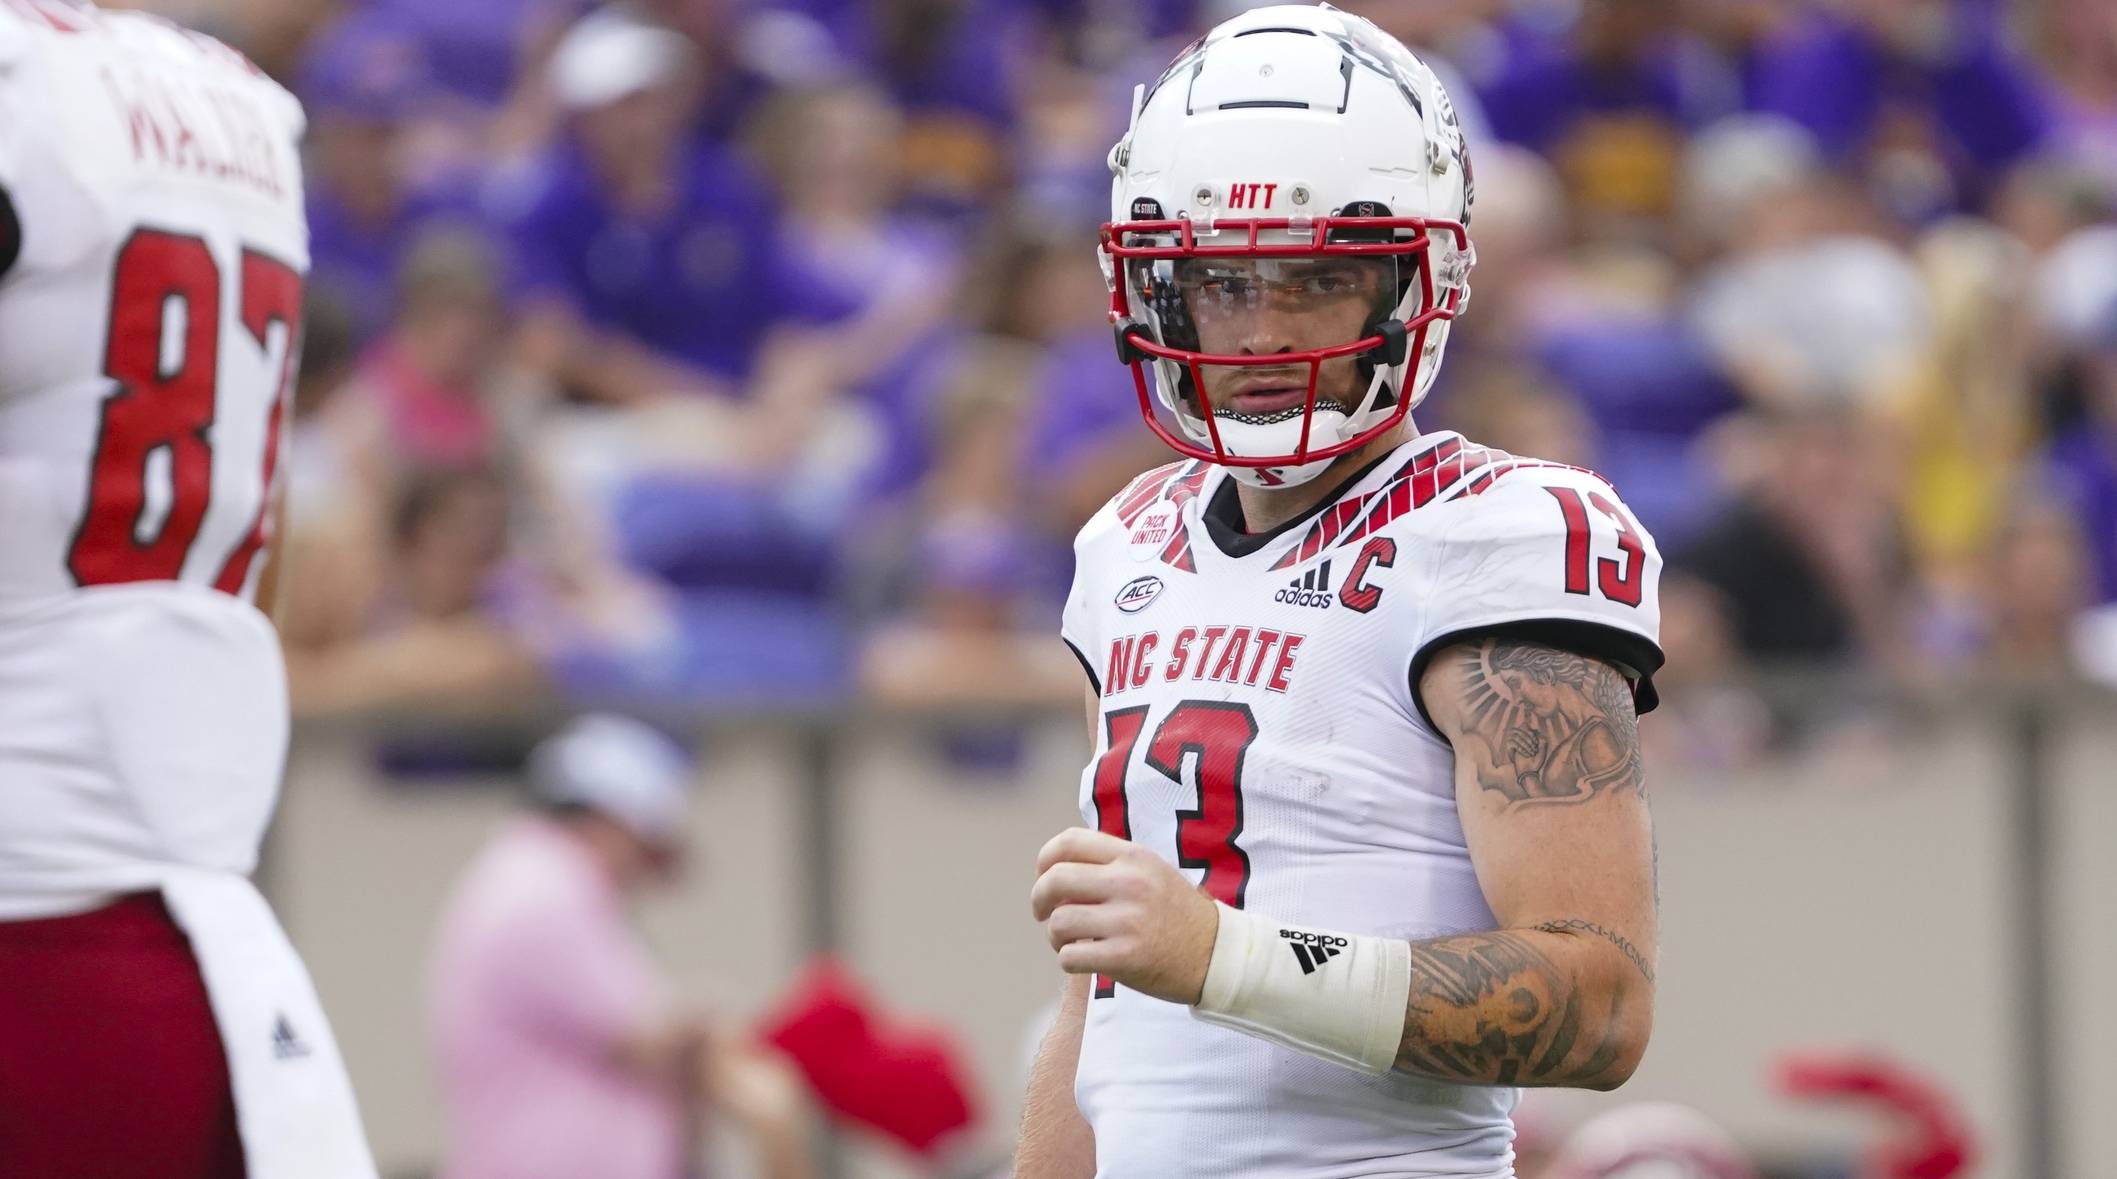 Kentucky Football to Add NC State QB Devin Leary as Transfer, per Report